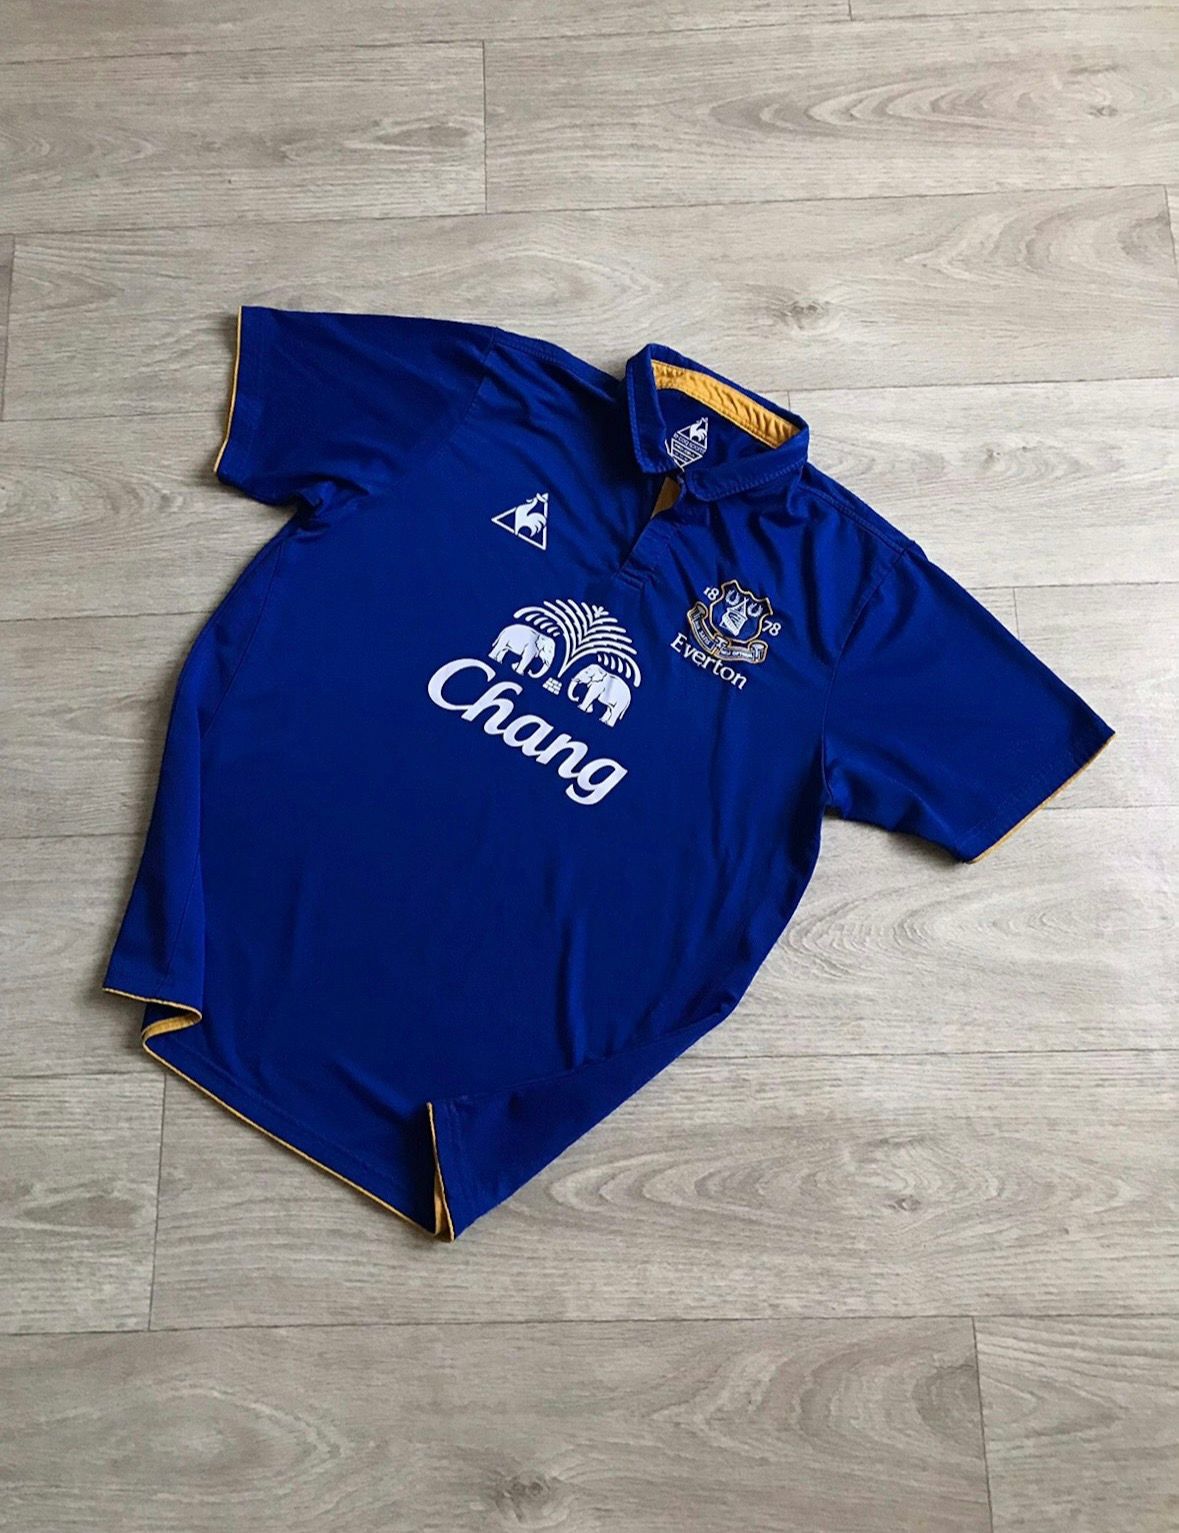 Pre-owned Soccer Jersey X Vintage Everton 2011/12 Soccer Jersey In Blue